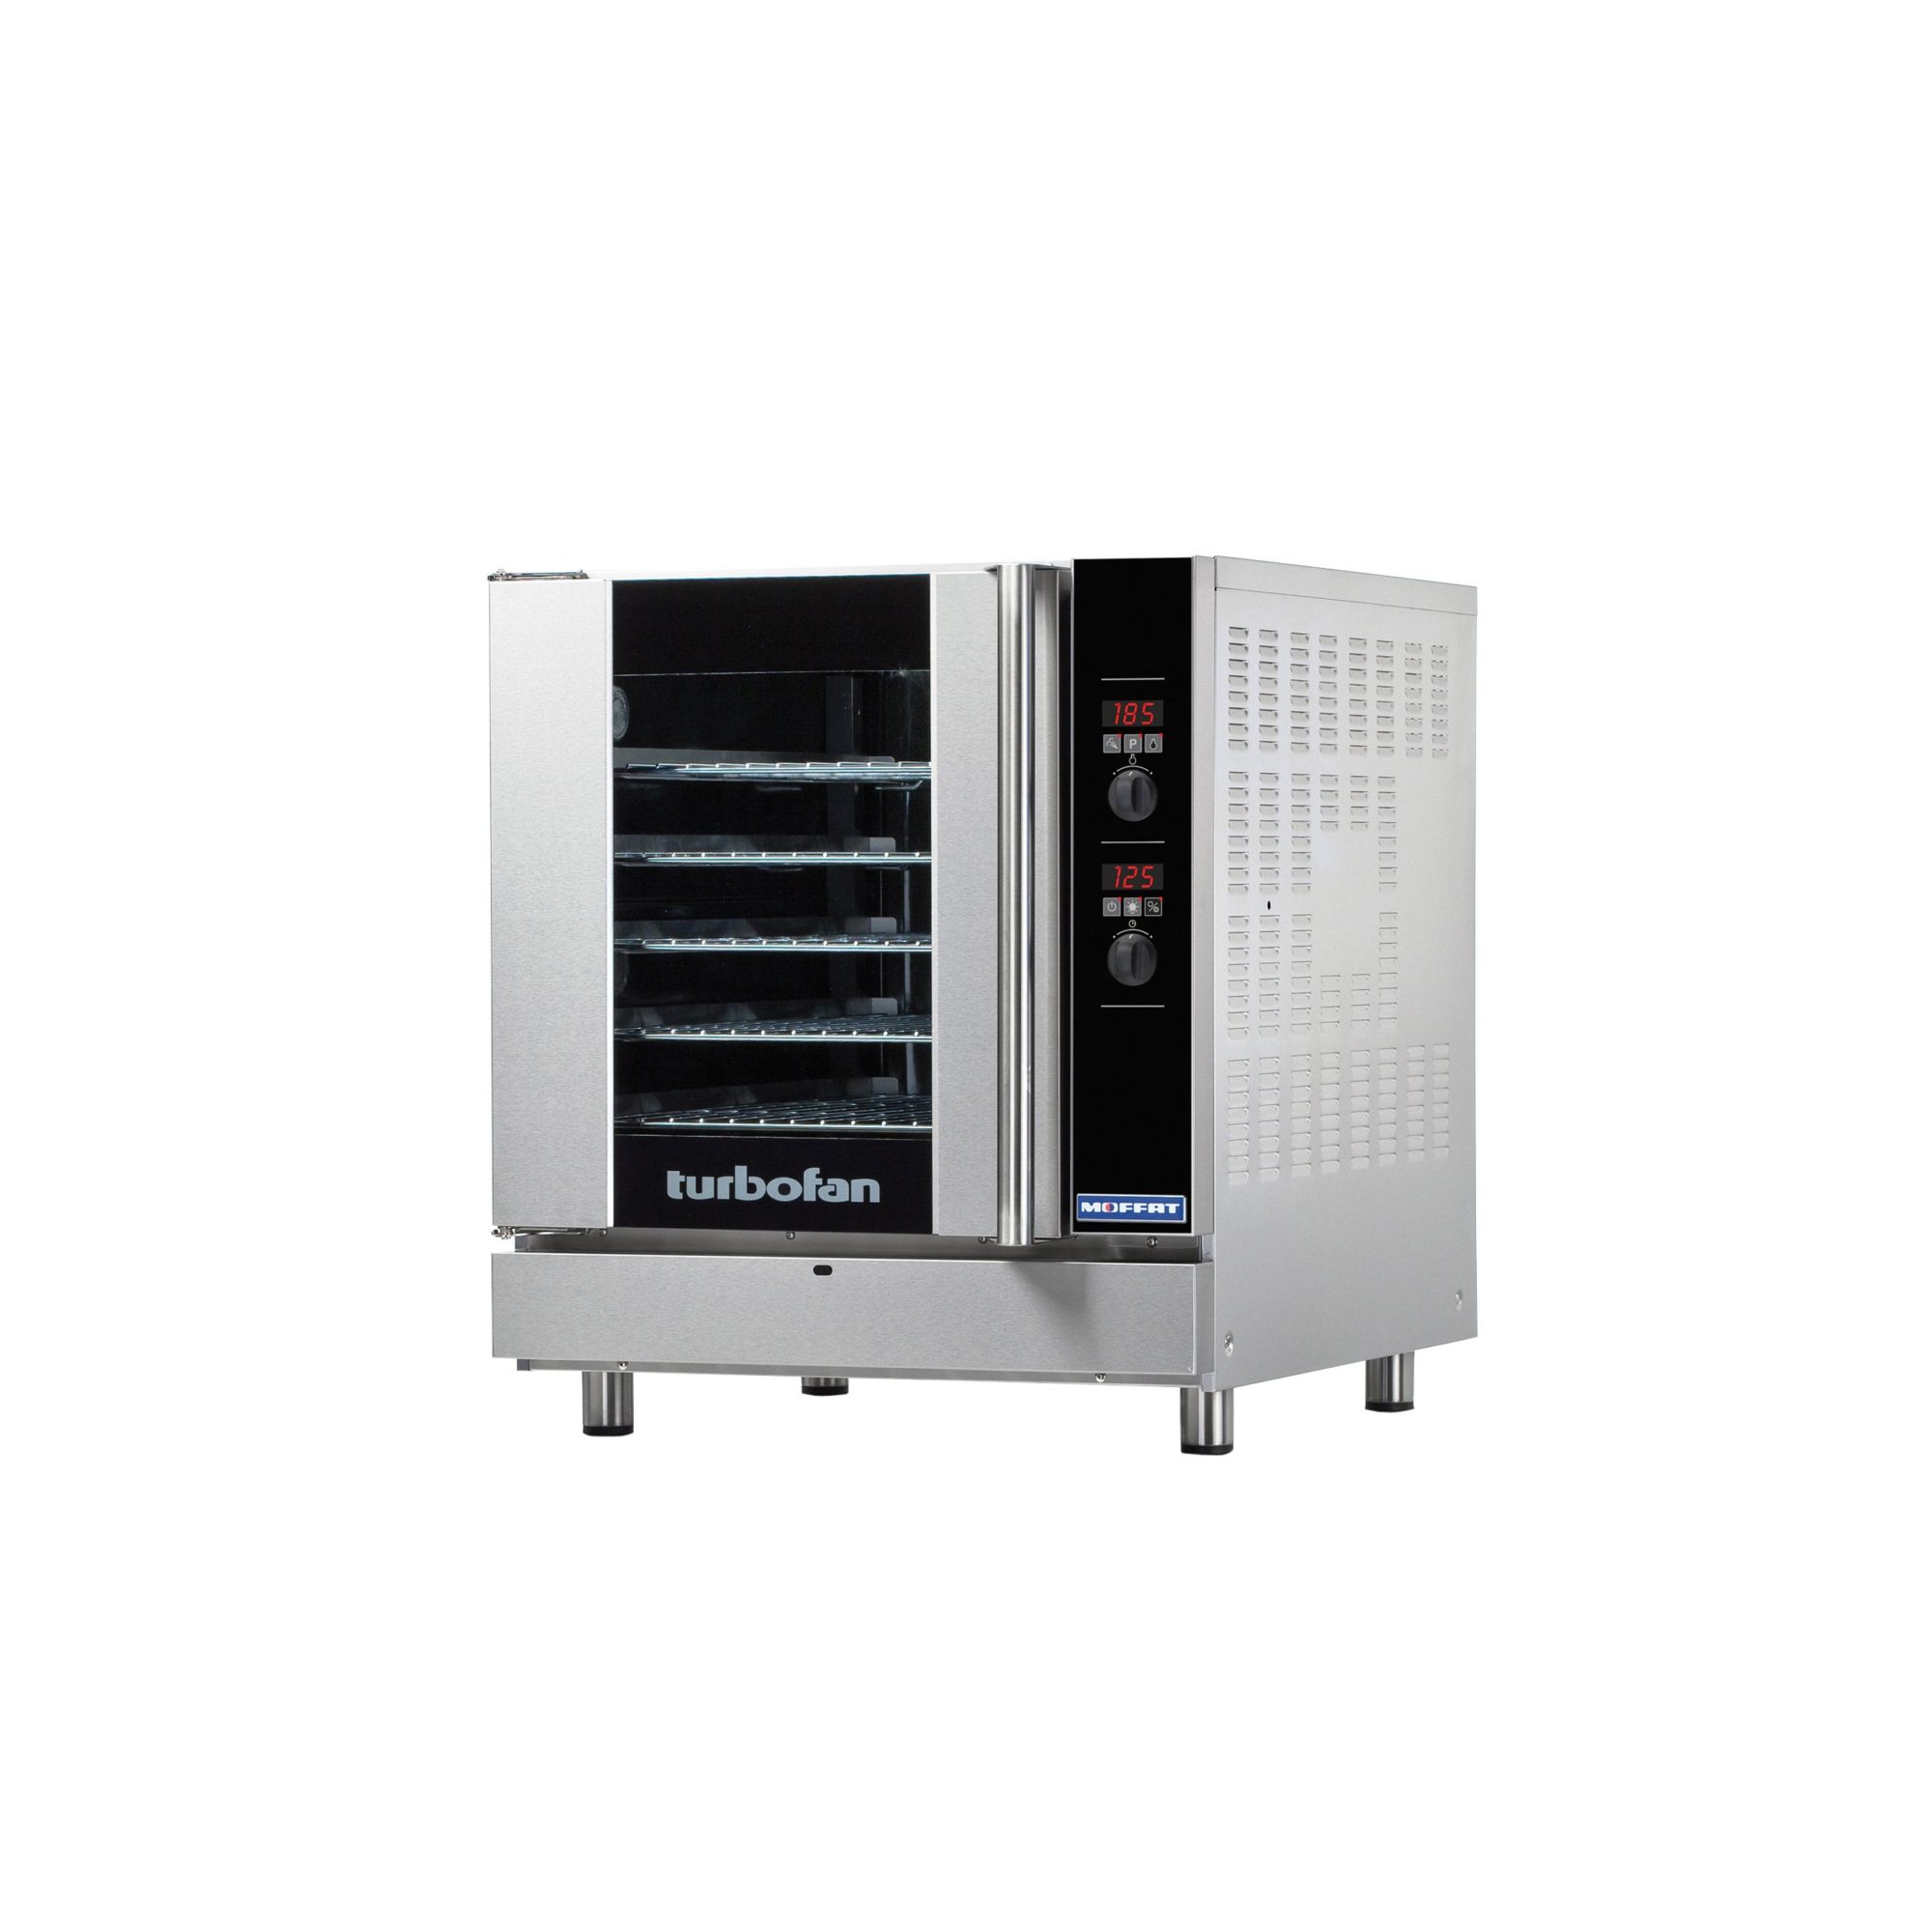 Turbofan E32D5 Full Size Electric Convection Oven - 1 Phase, 208V, 28 Amps